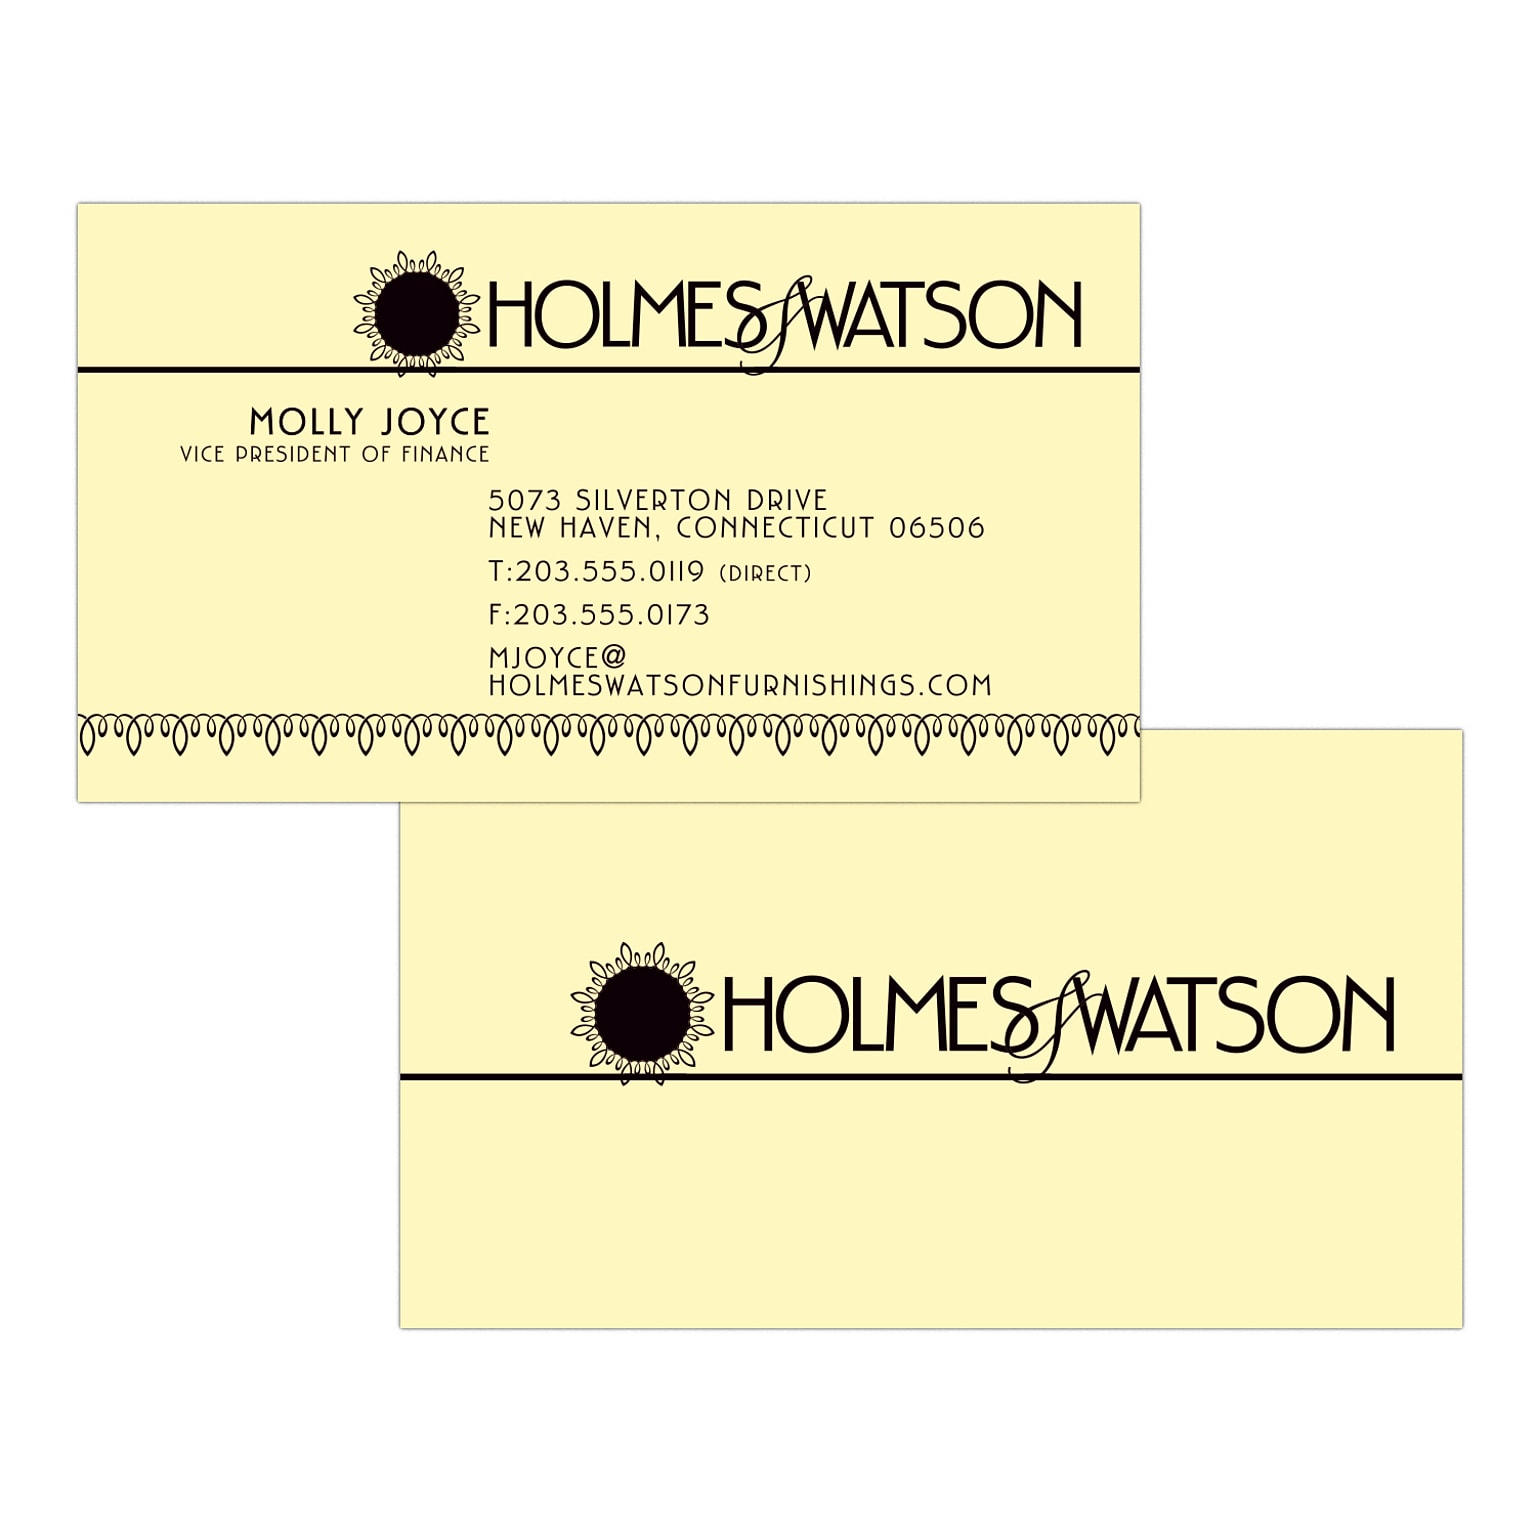 Custom 1-2 Color Business Cards, CLASSIC CREST® Baronial Ivory 80#, Flat Print, 1 Standard Ink, 2-Sided, 250/PK